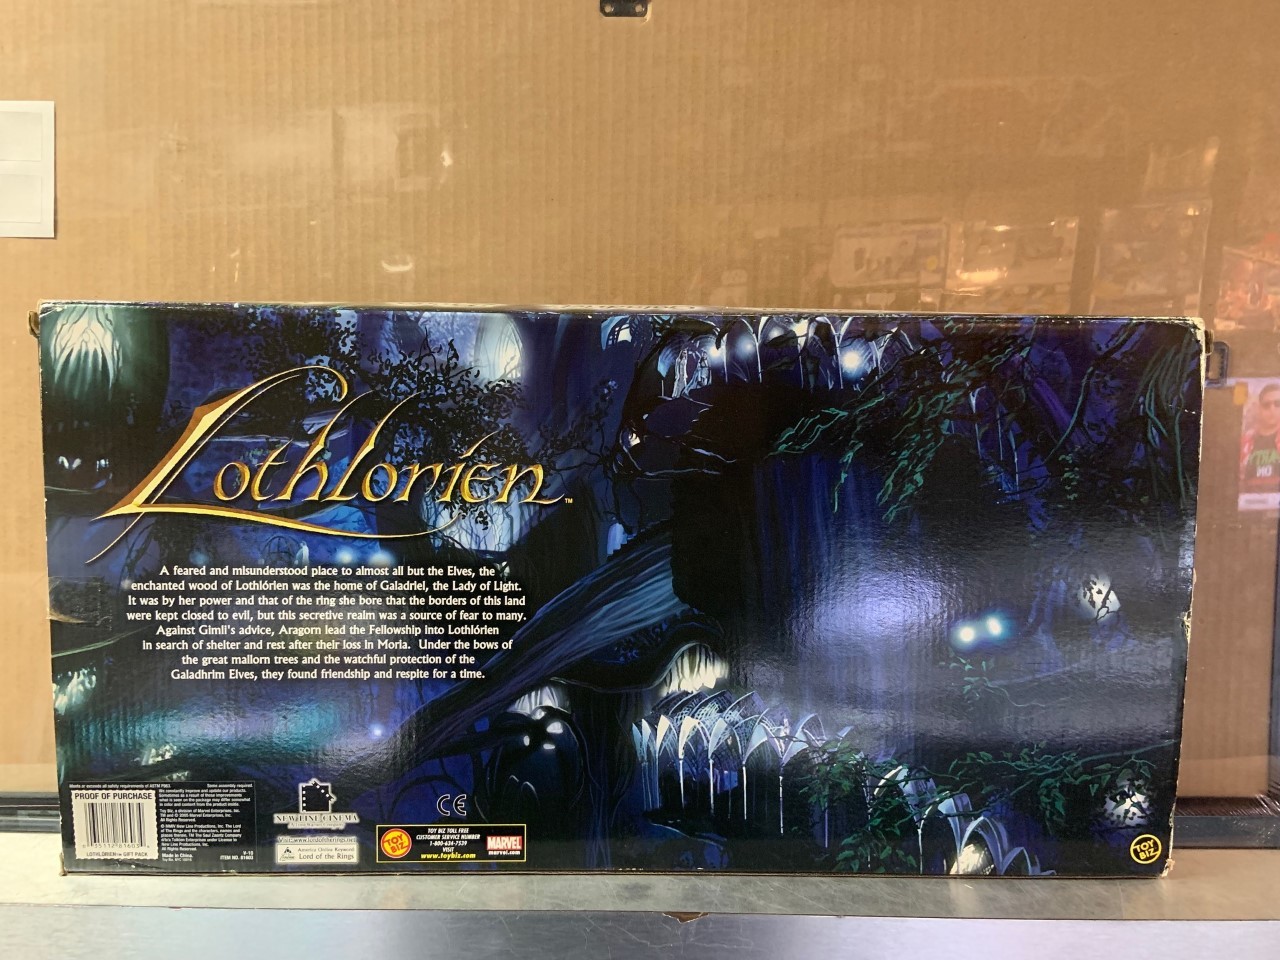 Lord of The Rings: The Fellowship of the Ring Lothlorien Gift Pack